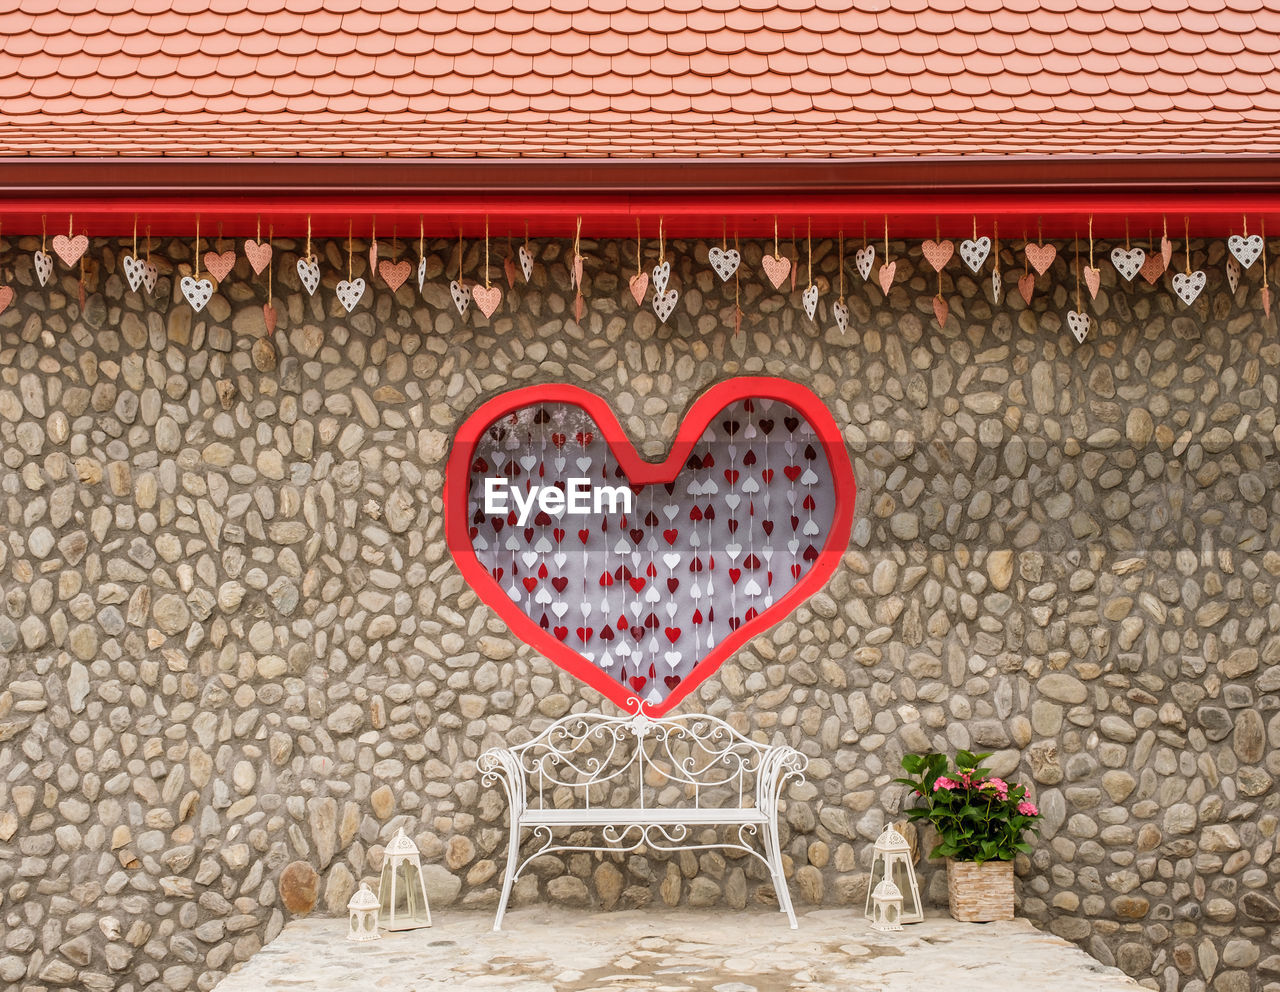 Love scene for taking pictures with an iron bench and a frame with a red heart in the center